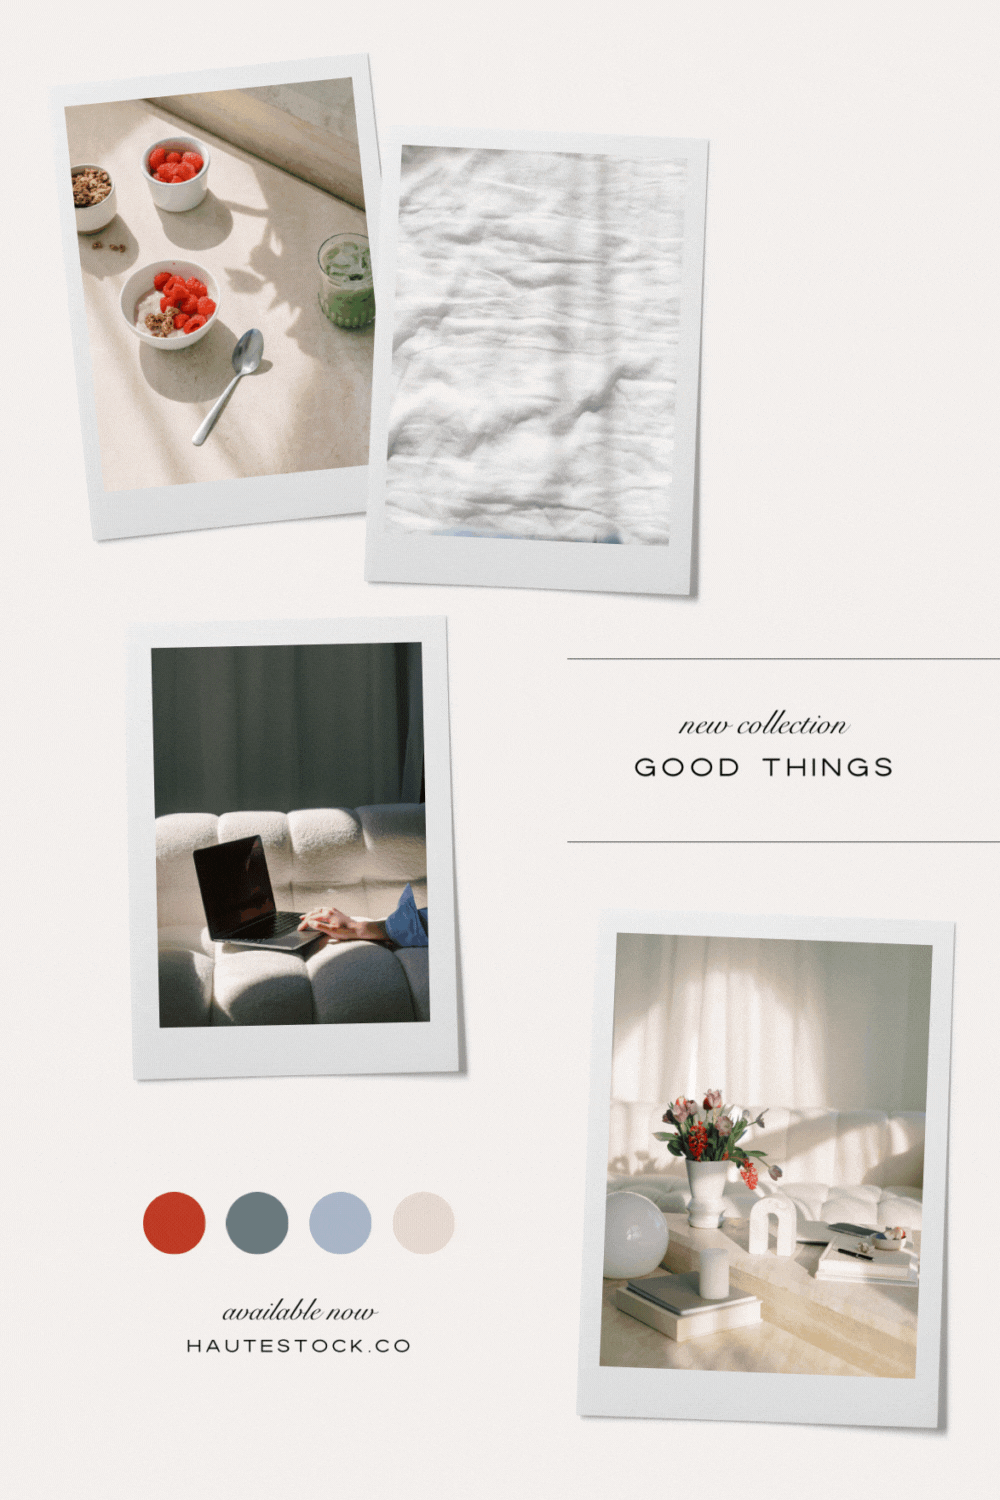 Mood Board for Good Things collection of stunning every day stock photos and videos that are inspirational to your audience, in neutrals and vibrant pops of blue and purple tones.